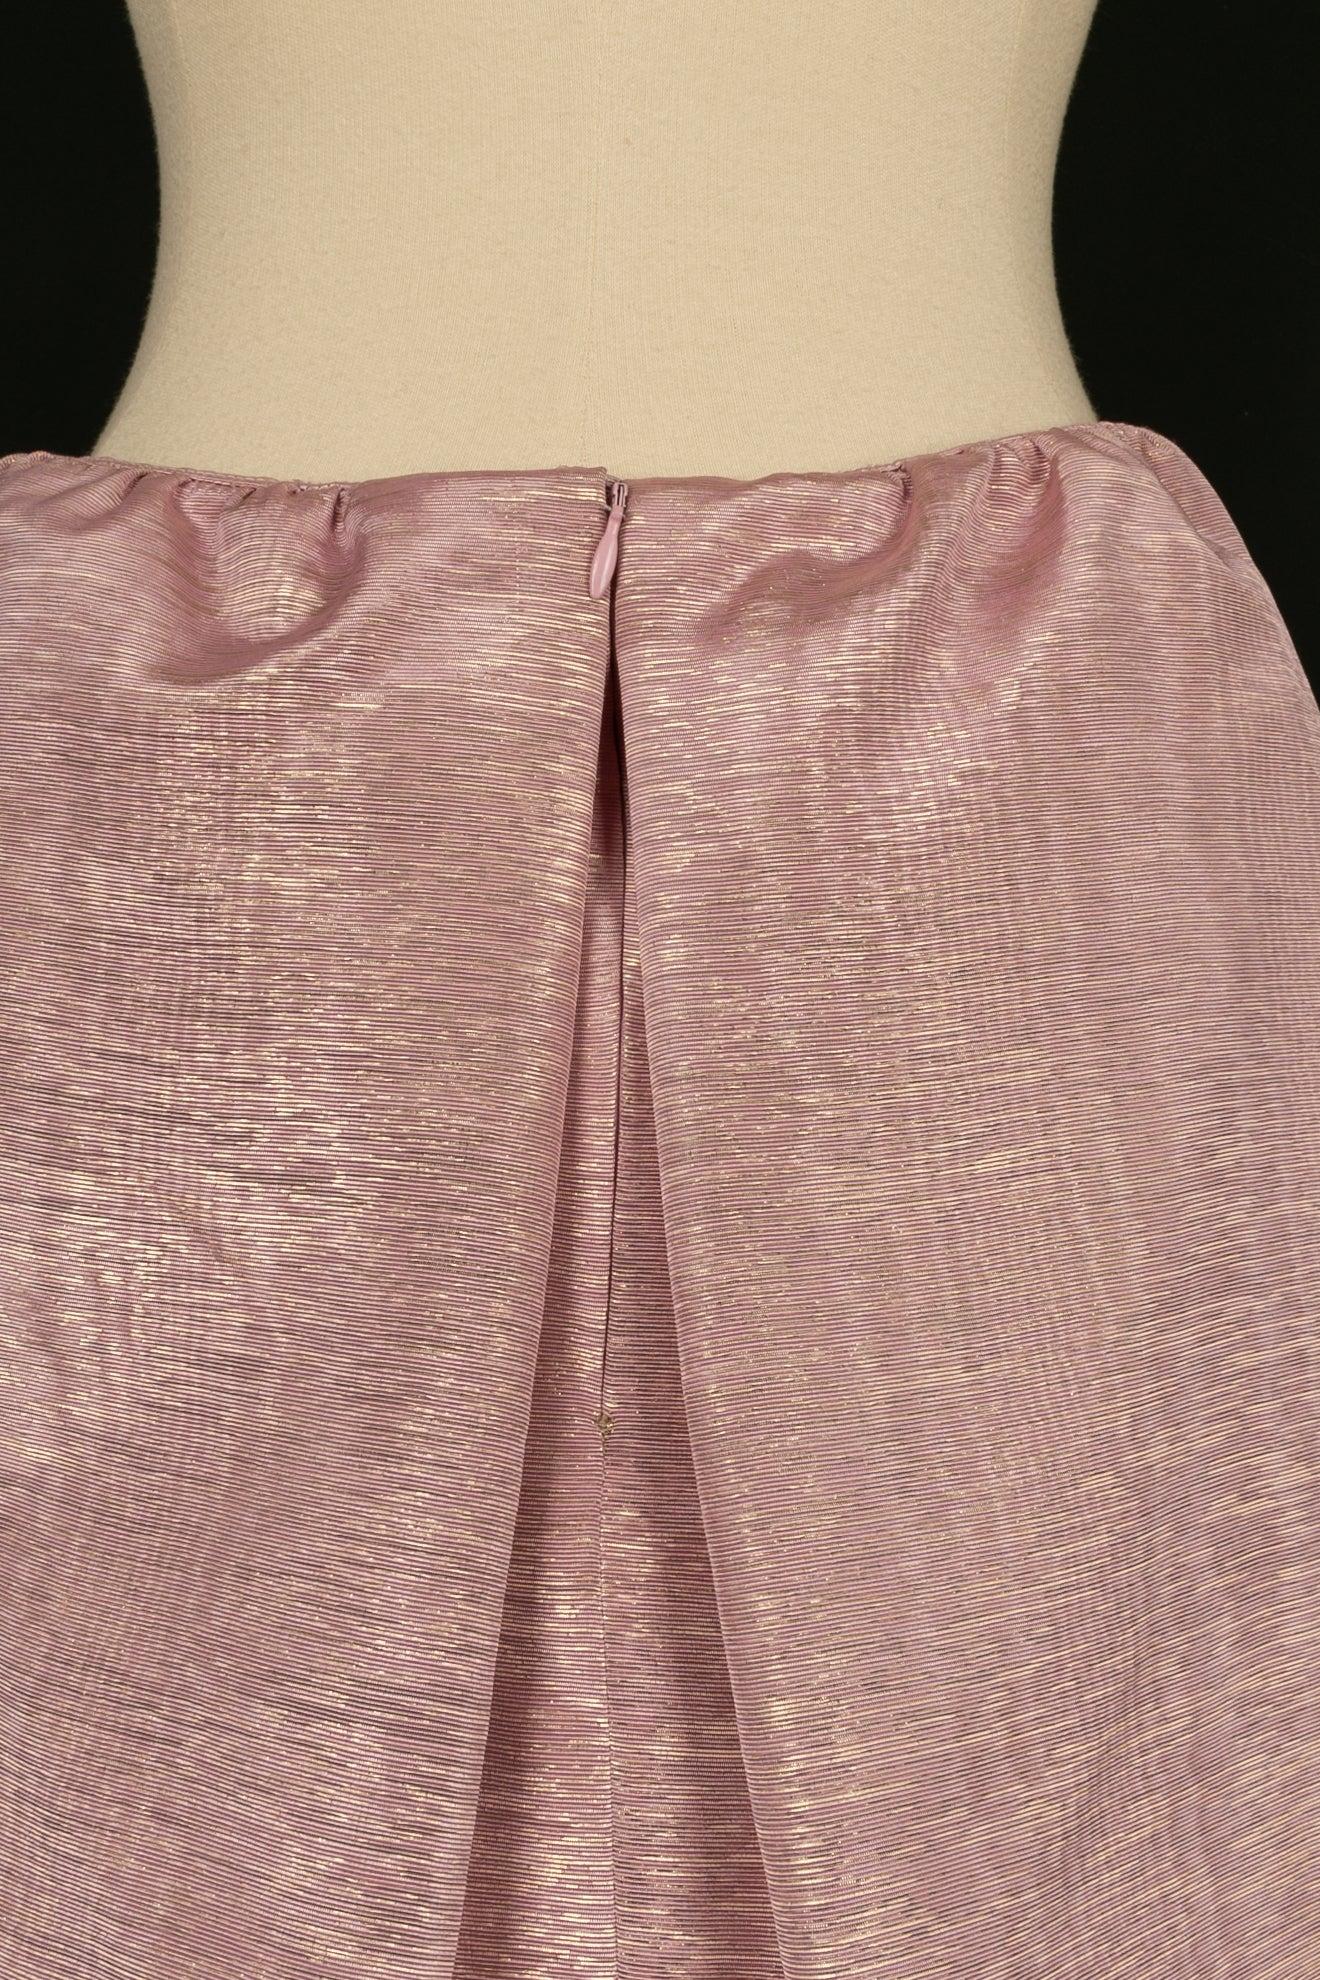 Nina Ricci Skirt in Pink Cotton Enhanced with Gold For Sale 1